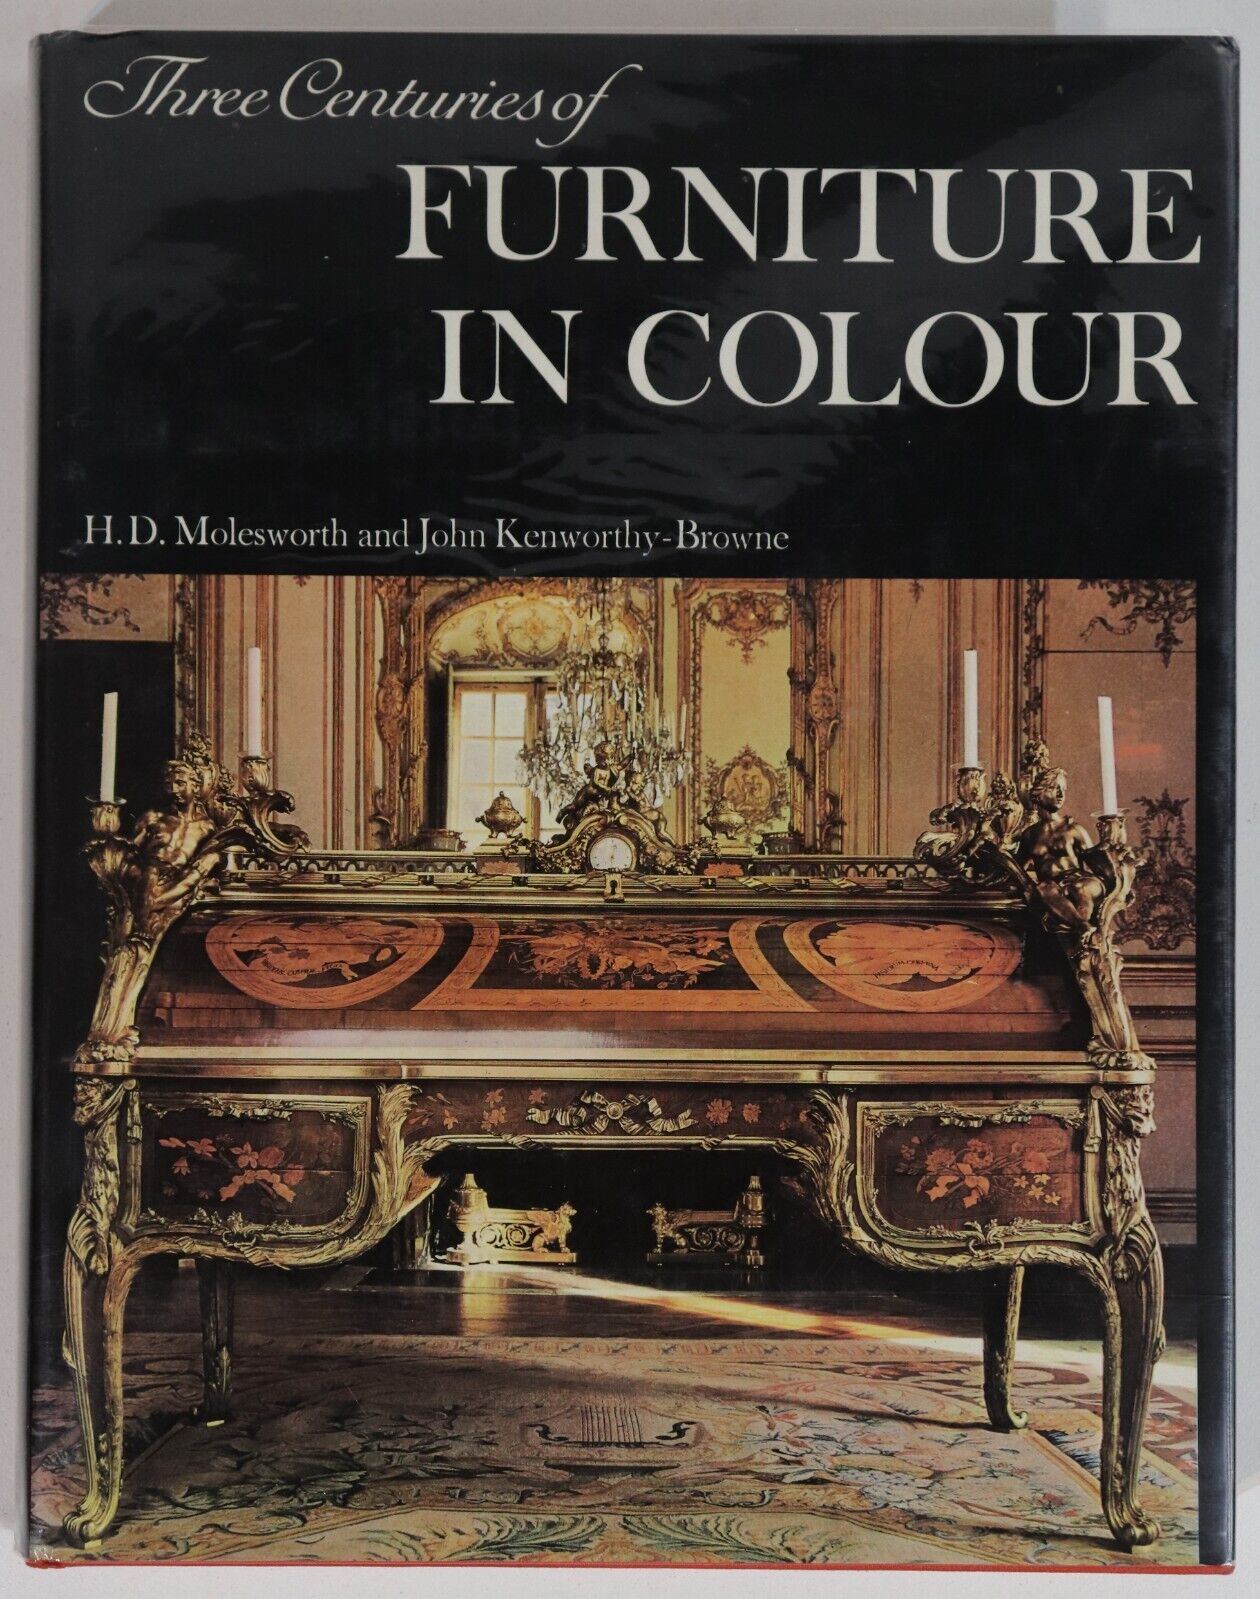 Three Centuries Of Furniture - 1972 - Antique Furniture Reference Book